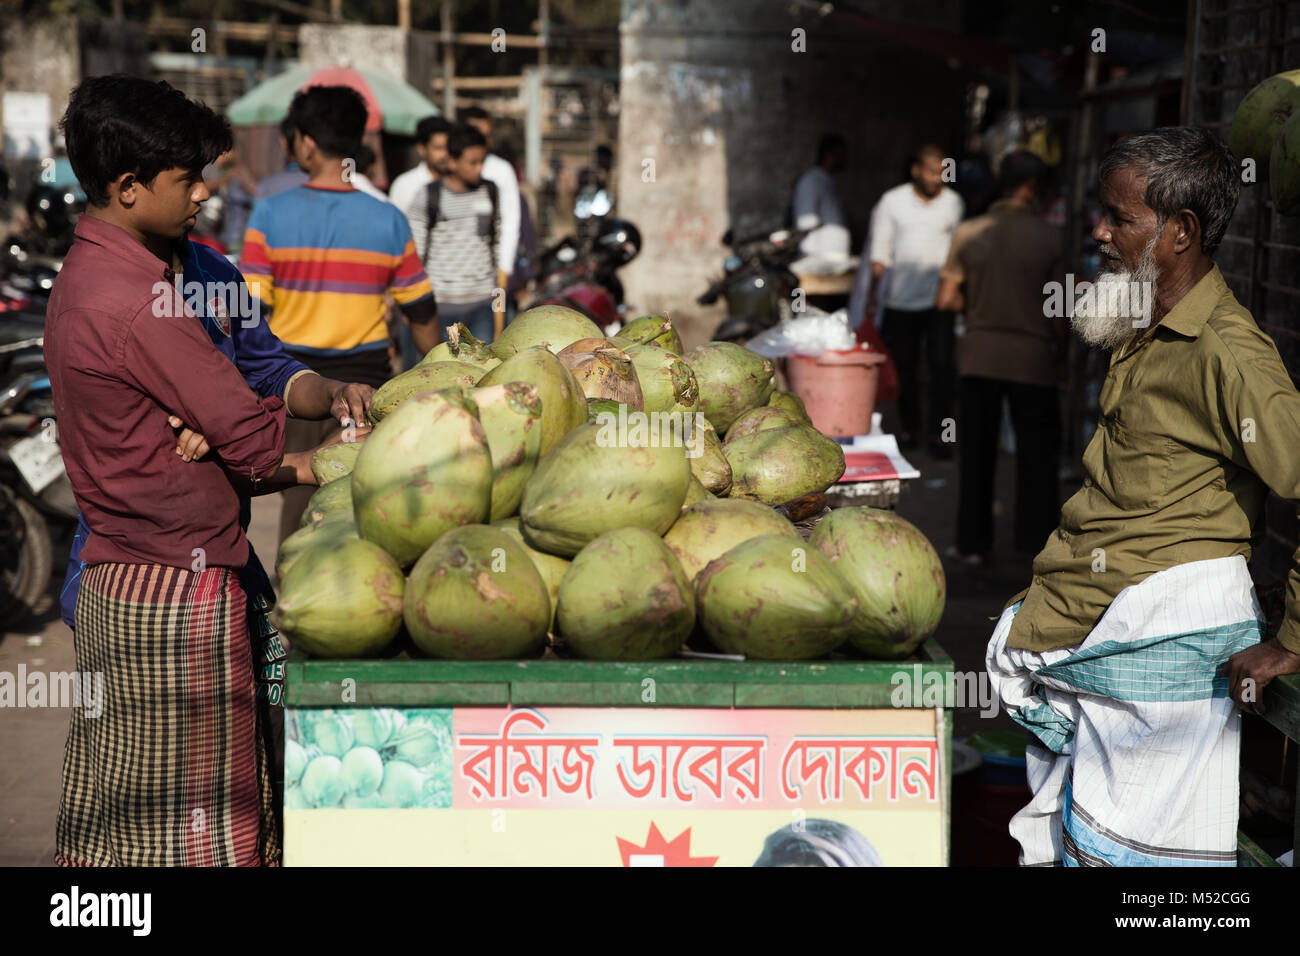 Two men talk business over a coconut seller's stall.  Dhaka, the capital of Bangladesh lies along the east bank of the Buriganga River in the heart of the Bengal delta. The city is a microcosm of the entire country, with diverse religious and ethnic communities. Dhaka is the economic, cultural and political center of Bangladesh and is a major financial center of South Asia. It is one of the world's most populated cities with a population of 18.89 million people in the Greater Dhaka Area. Stock Photo